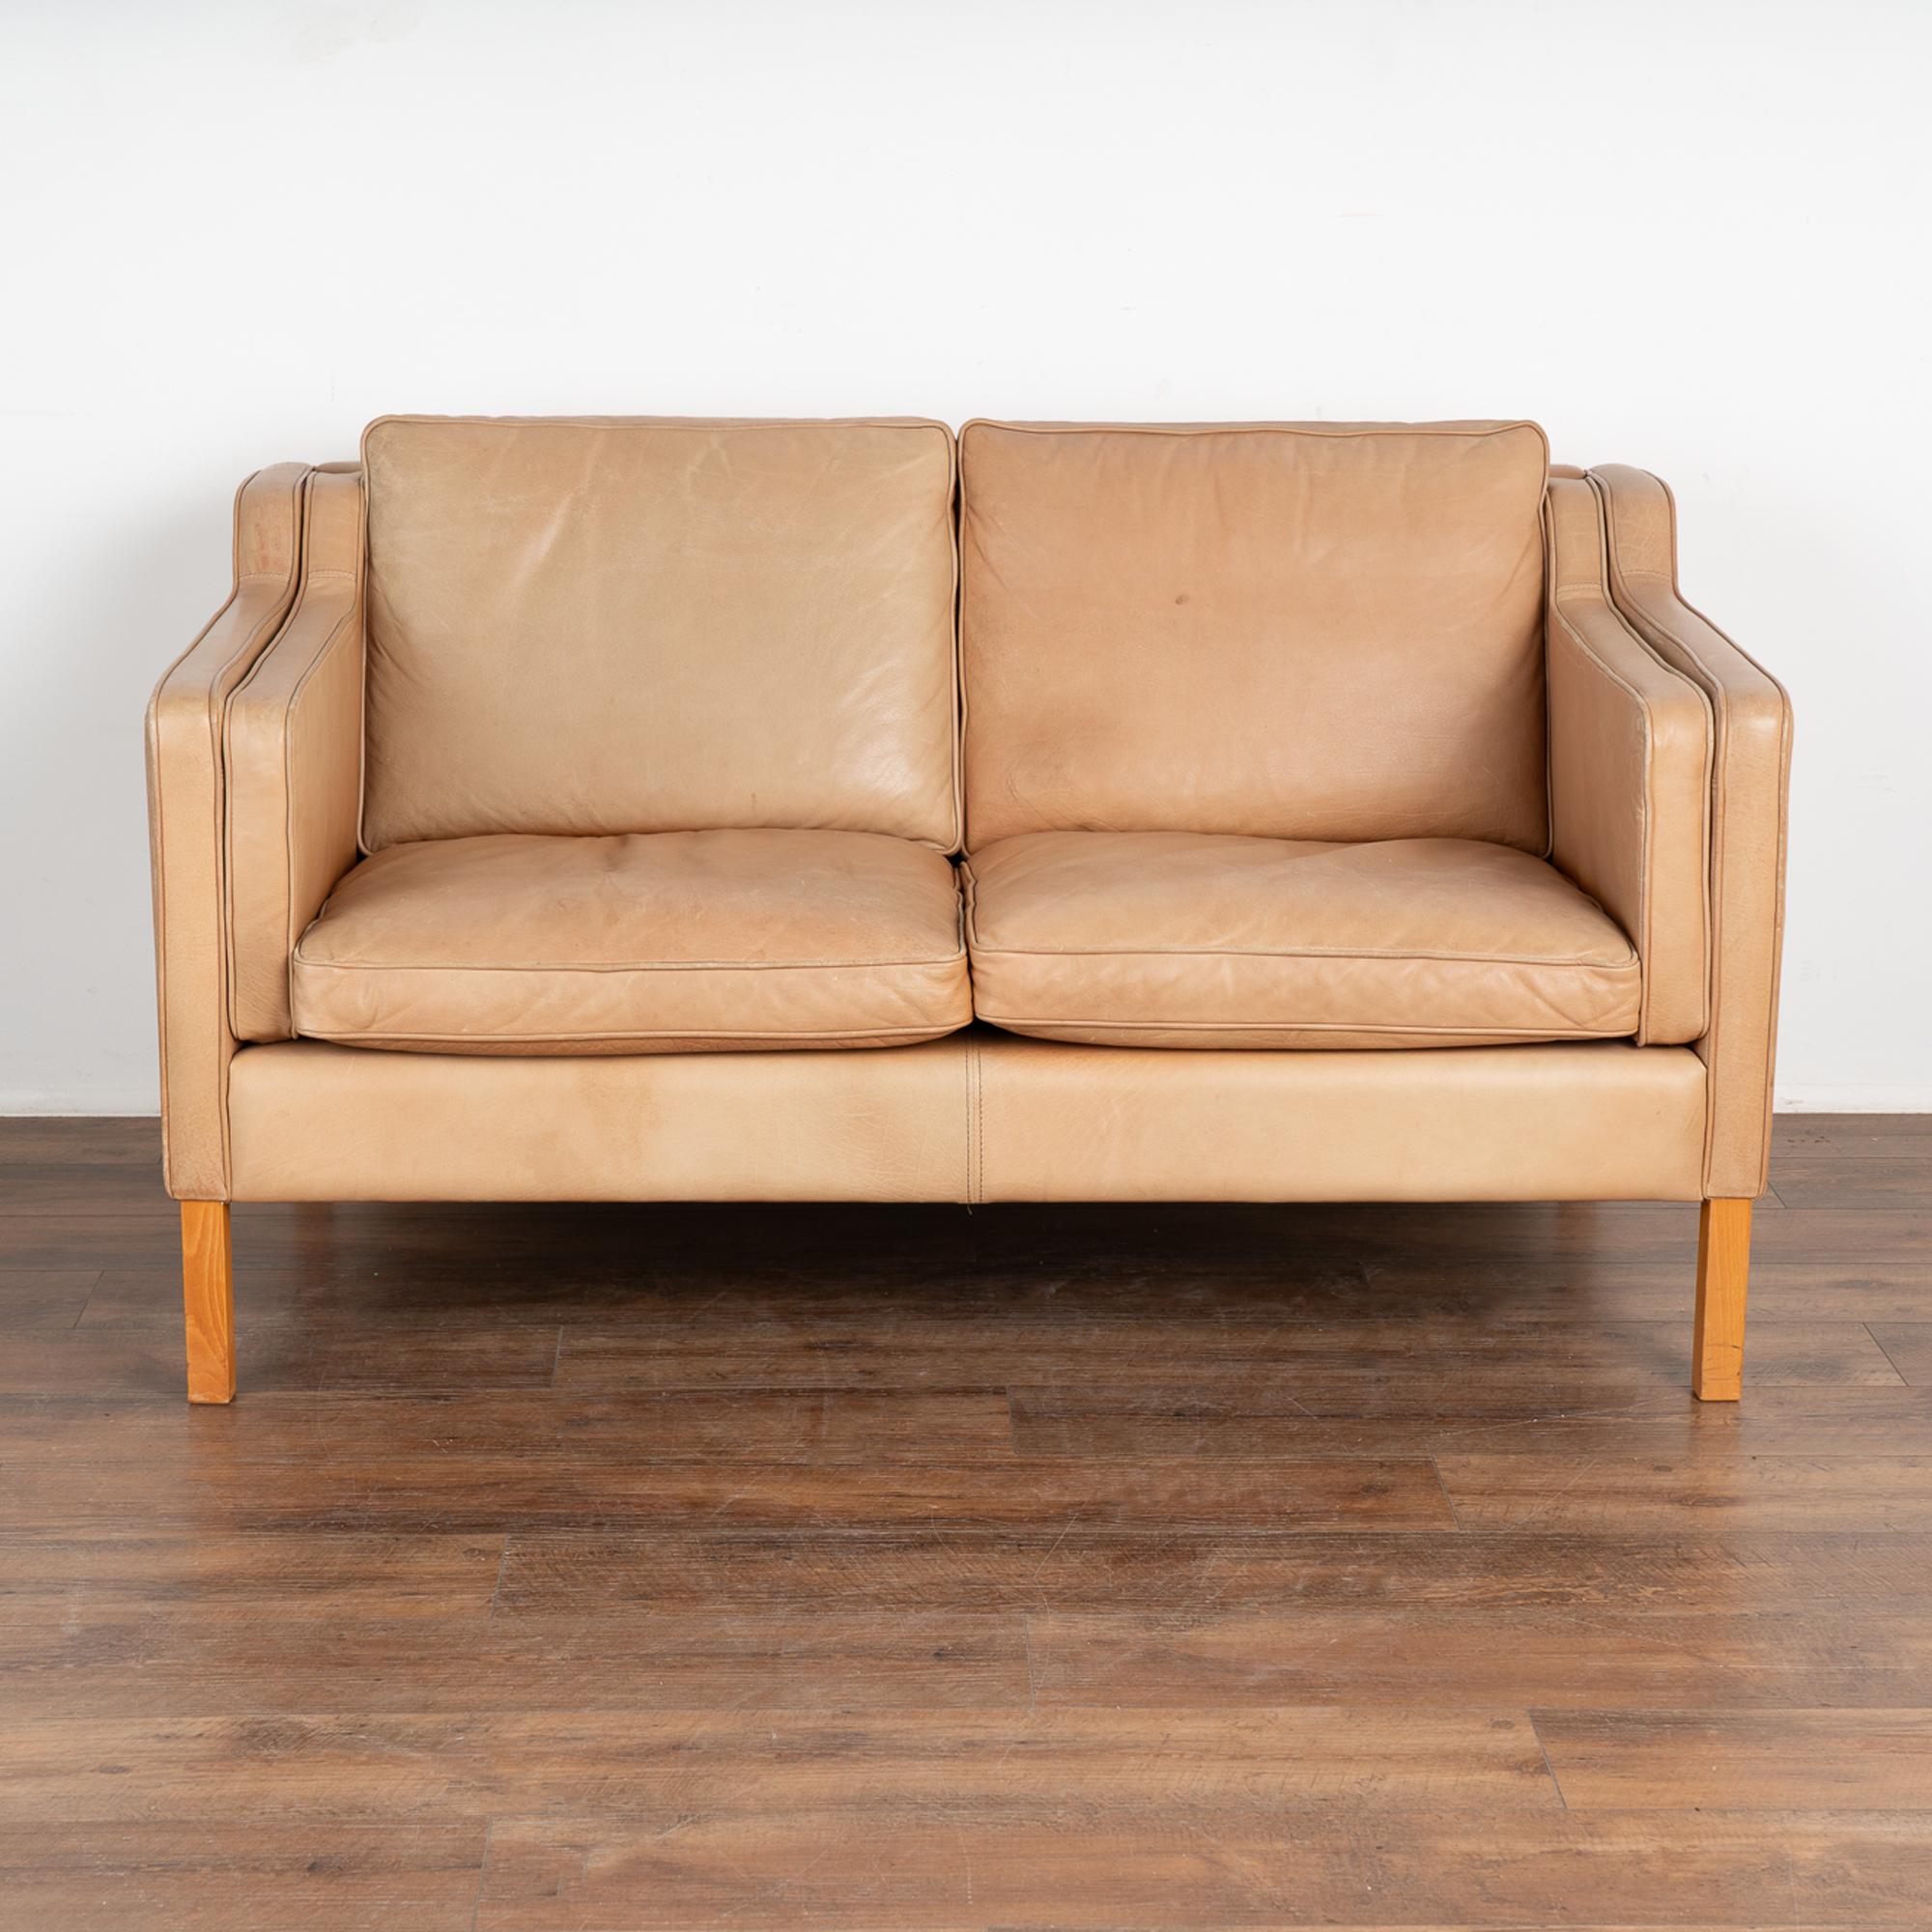 Mid-Century Modern Mid Century Two Seat Sofa Loveseat by Stouby of Denmark, circa 1960-70